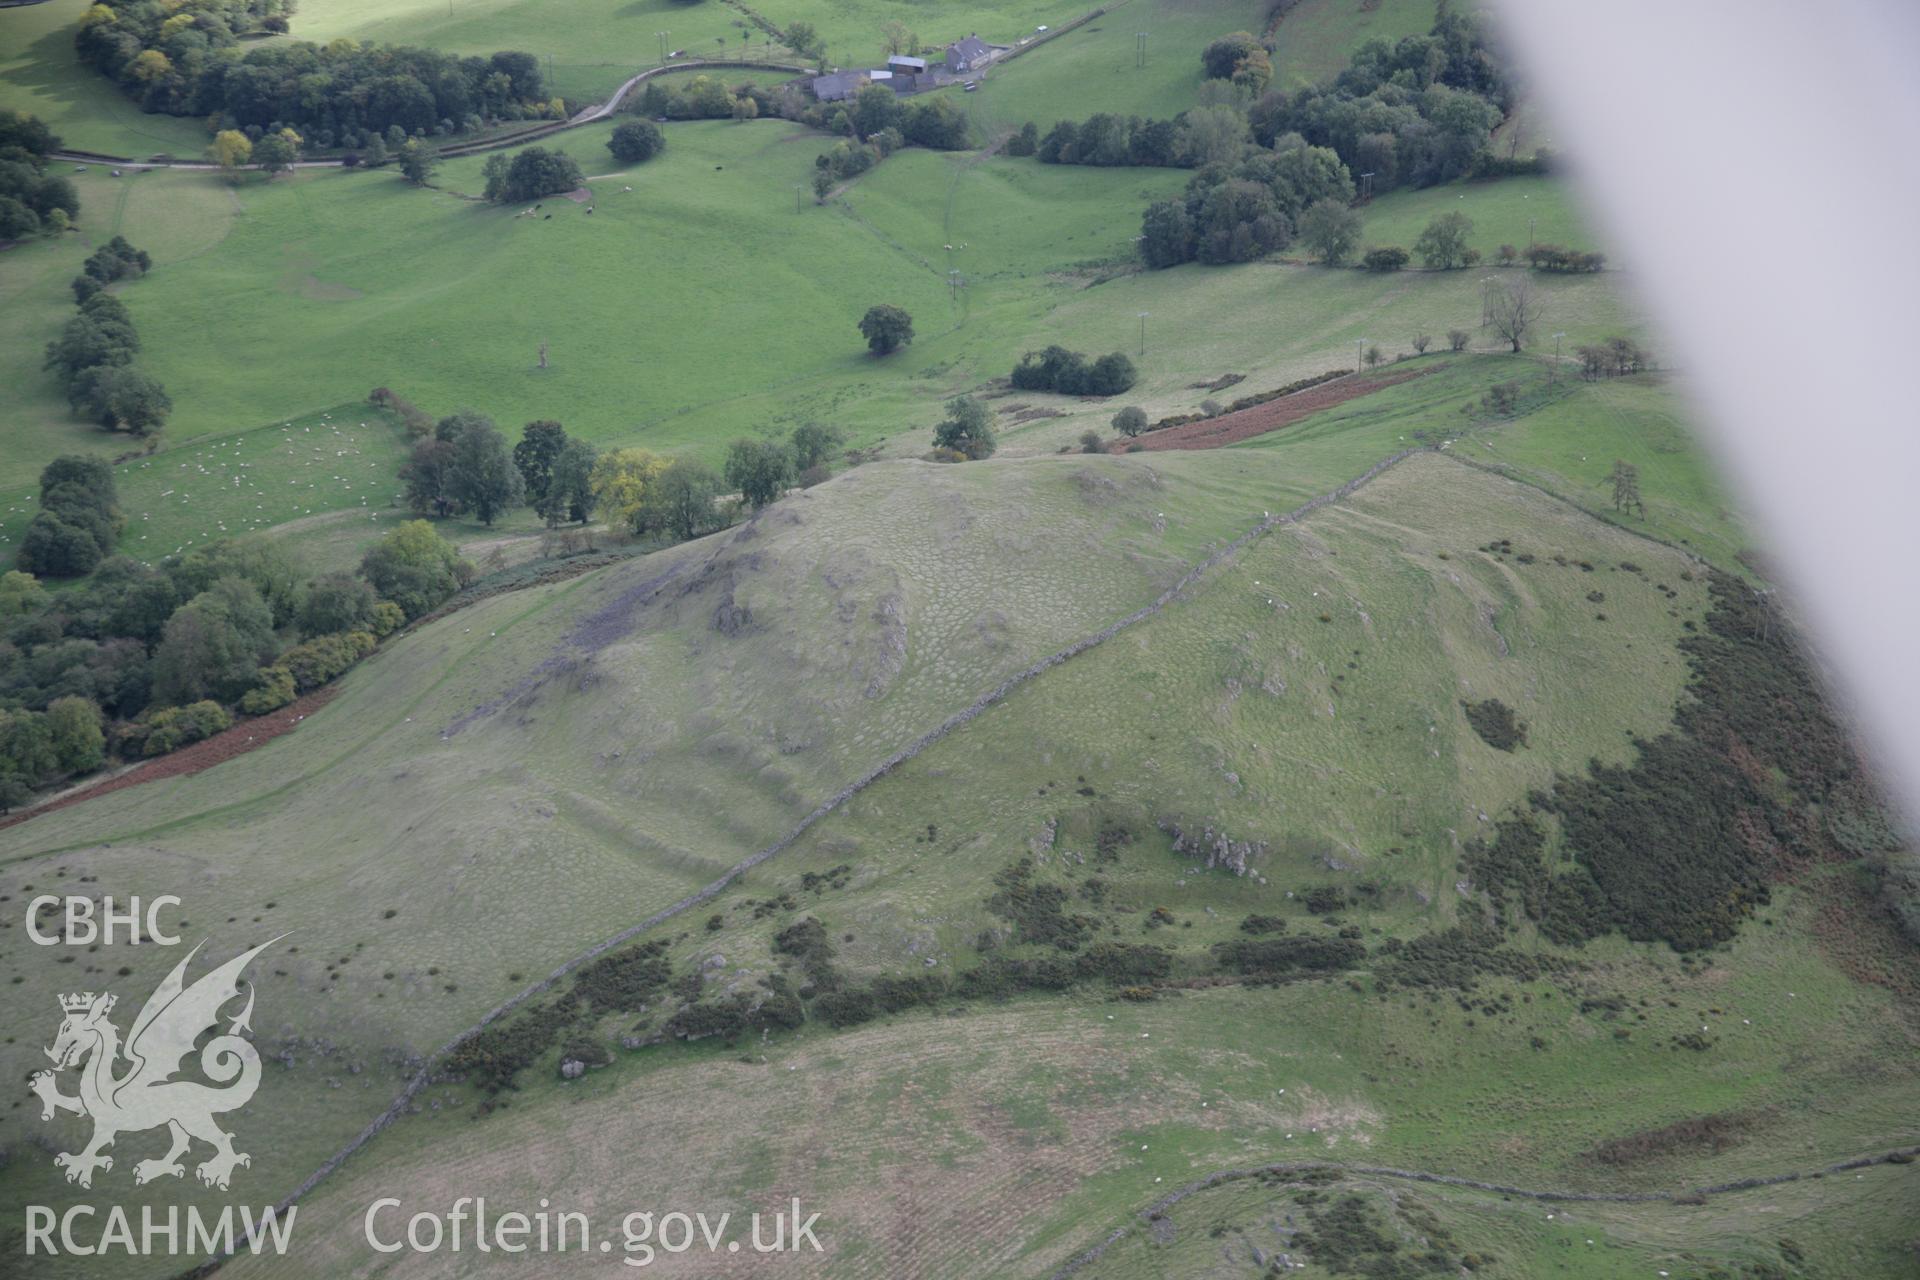 RCAHMW colour oblique aerial photograph of Gaer Fawr from the north. Taken on 13 October 2005 by Toby Driver